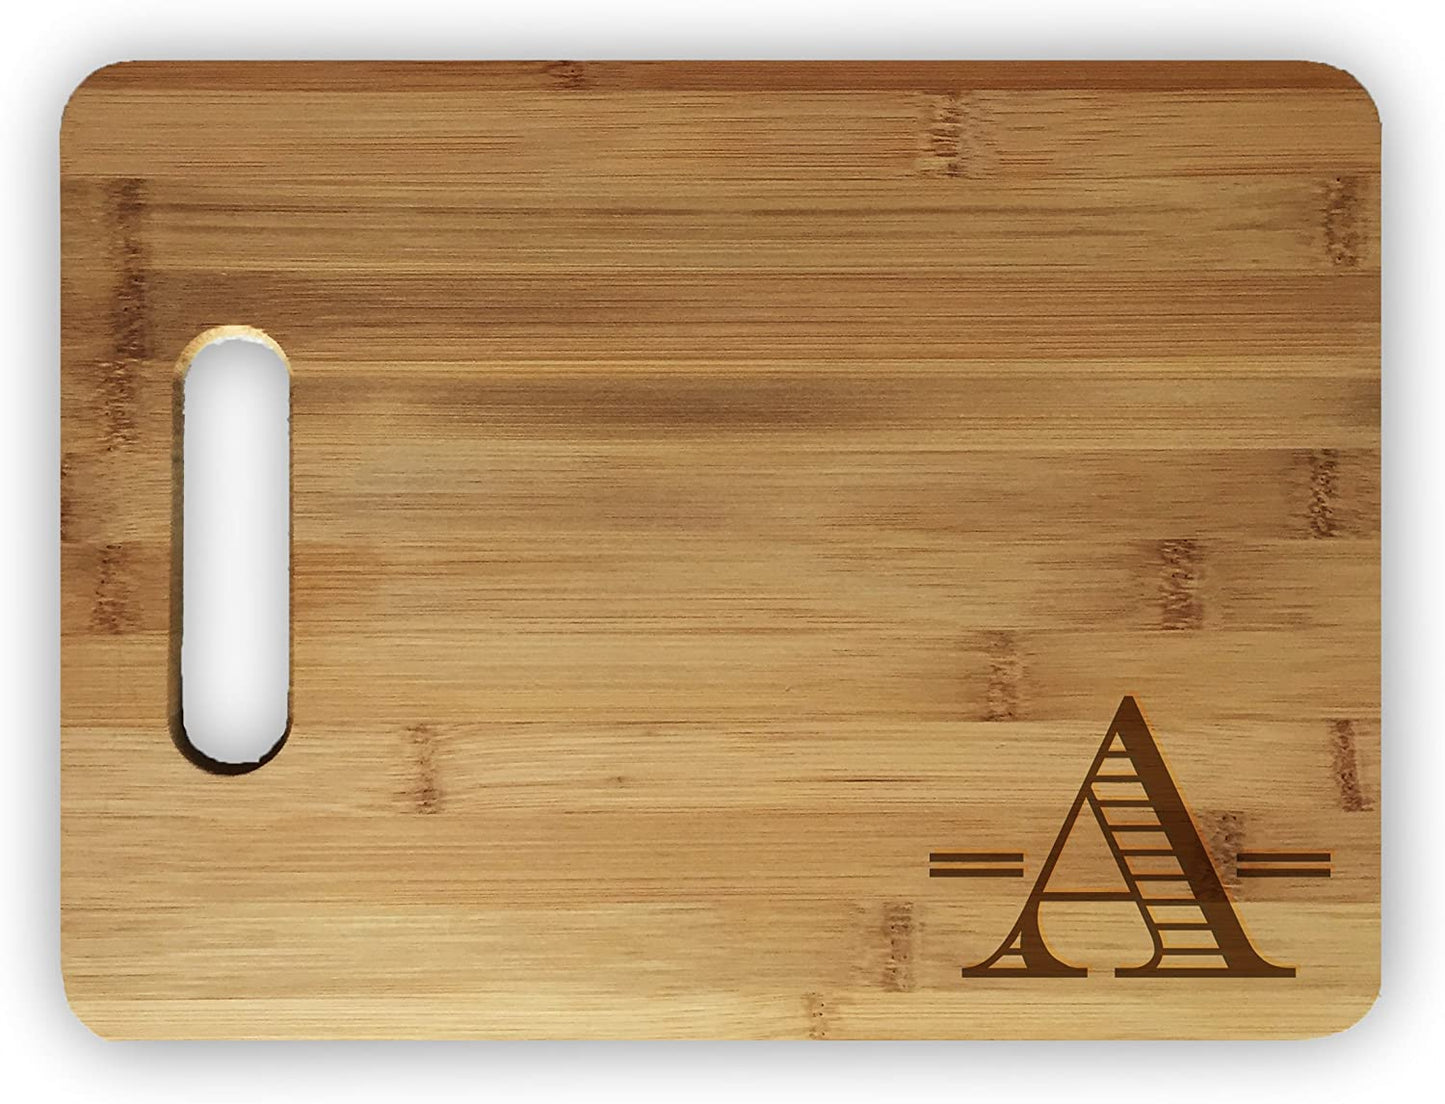 Custom Engraved Large Bamboo Wood Cutting Board - Add Your Text, Logo, Photo - Choose from 6 Designs!